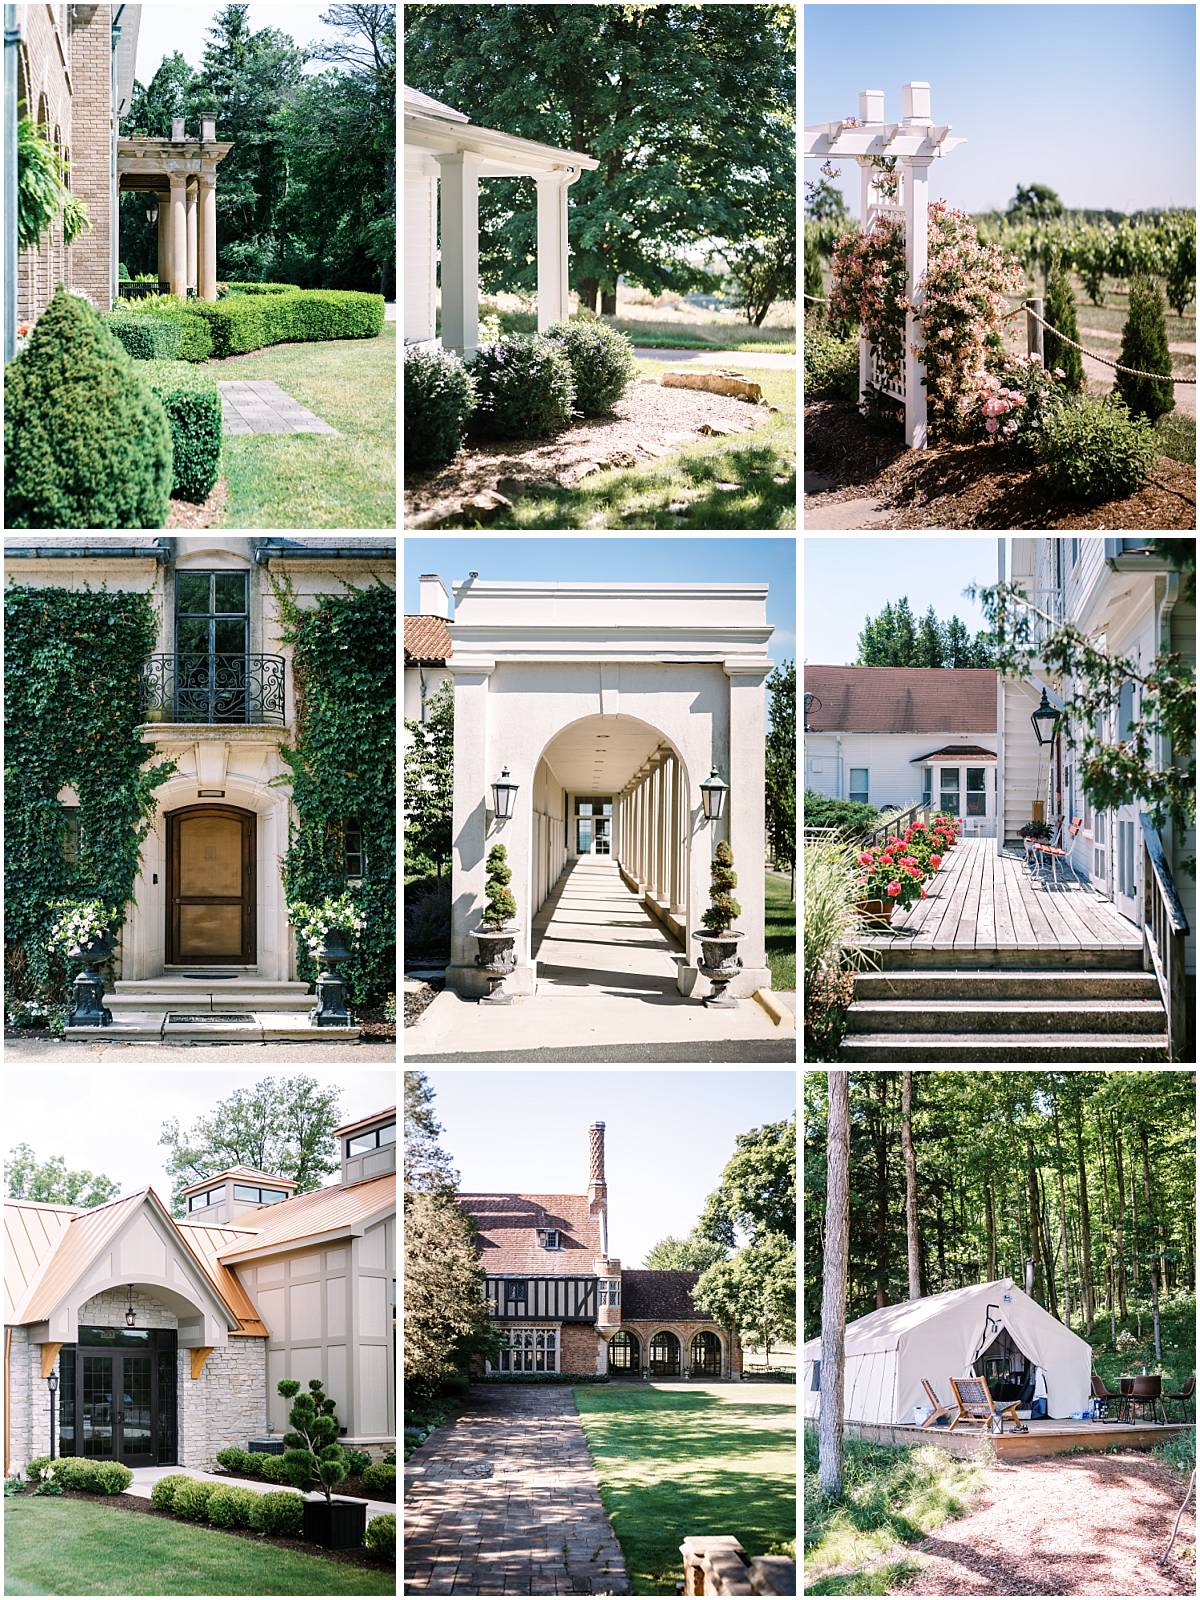 michigan's best wedding venues by brian d smith photography on a tour of best ceremony and reception wedding locations in detroit, west michigan and northern michigan